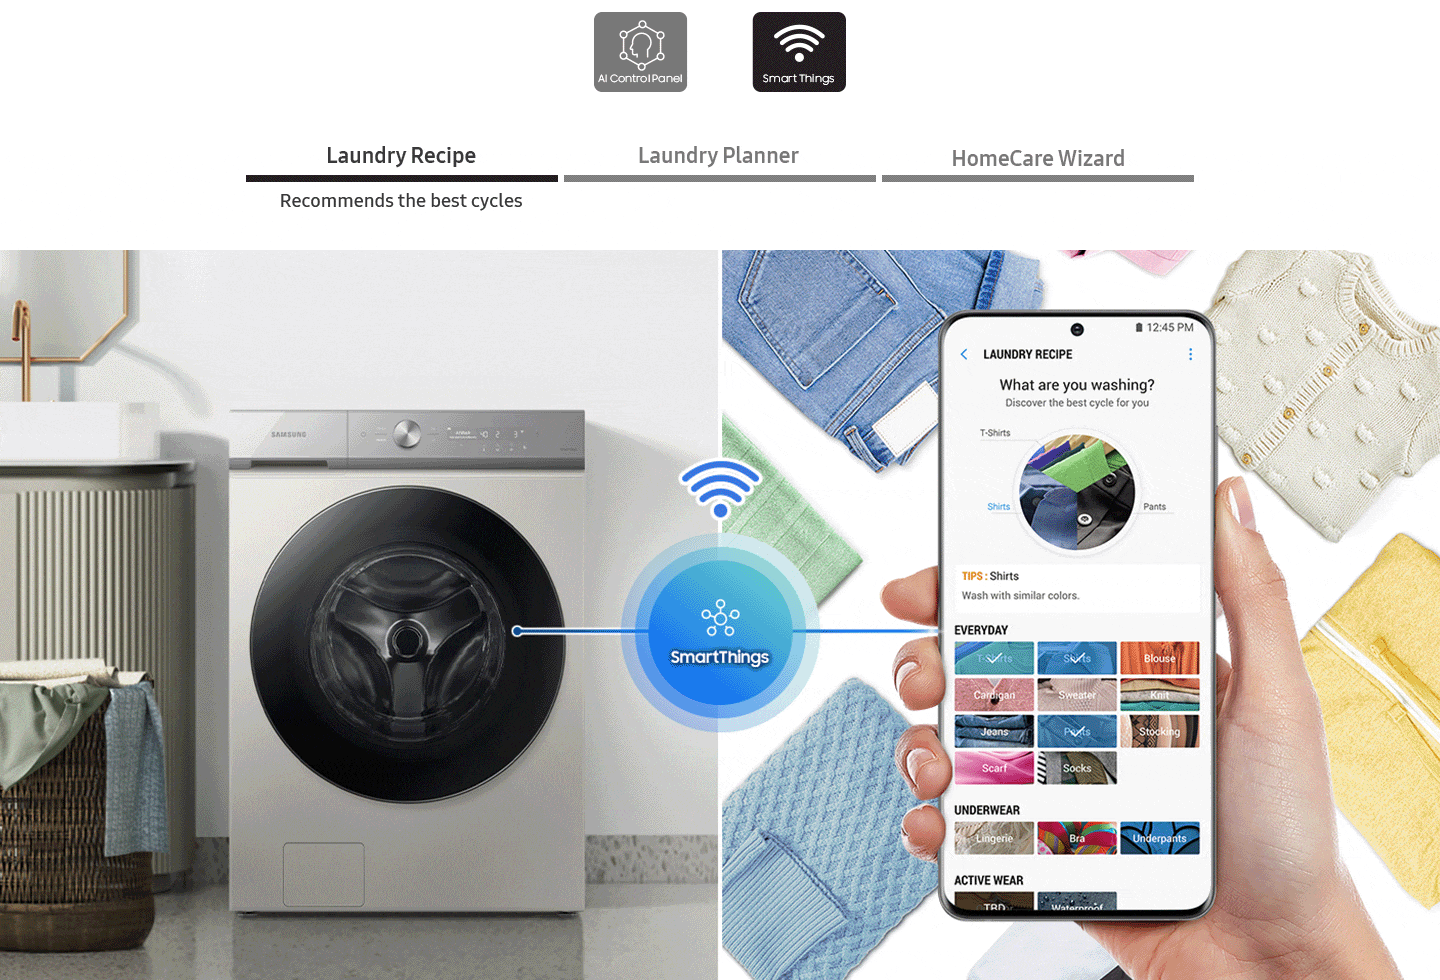 Description: SmartThings and Laundry Recipe selected. Recommends the best cycles. A white Bespoke Grande AI washer next to a hand and phone. Laundry Recipe is onscreen. Between is a SmartThings logo, Wi-Fi symbol. Then Laundry Planner selected. Curates your daily laundry plan. Laundry Planner is onscreen. Then HomeCare Wizard is selected. Self diagnosing and managing. HomeCare Wizard is onscreen.